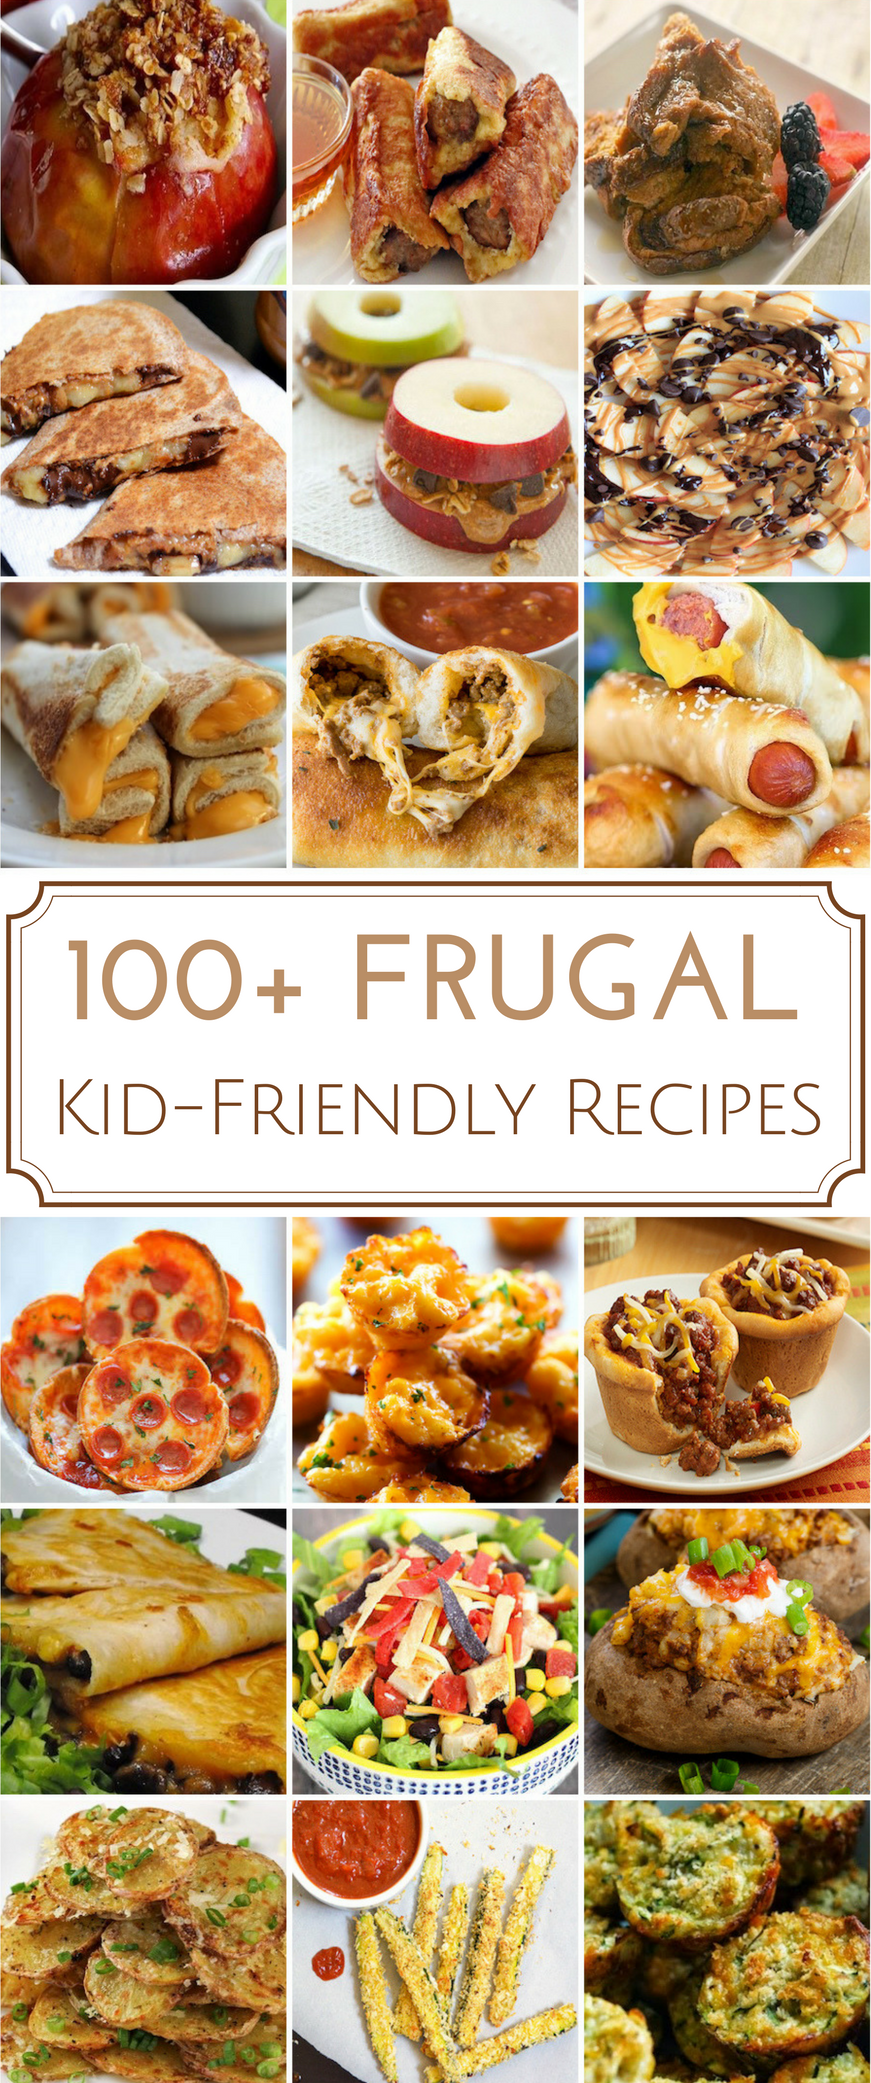 120 Frugal Kid-Friendly Recipes - Prudent Penny Pincher